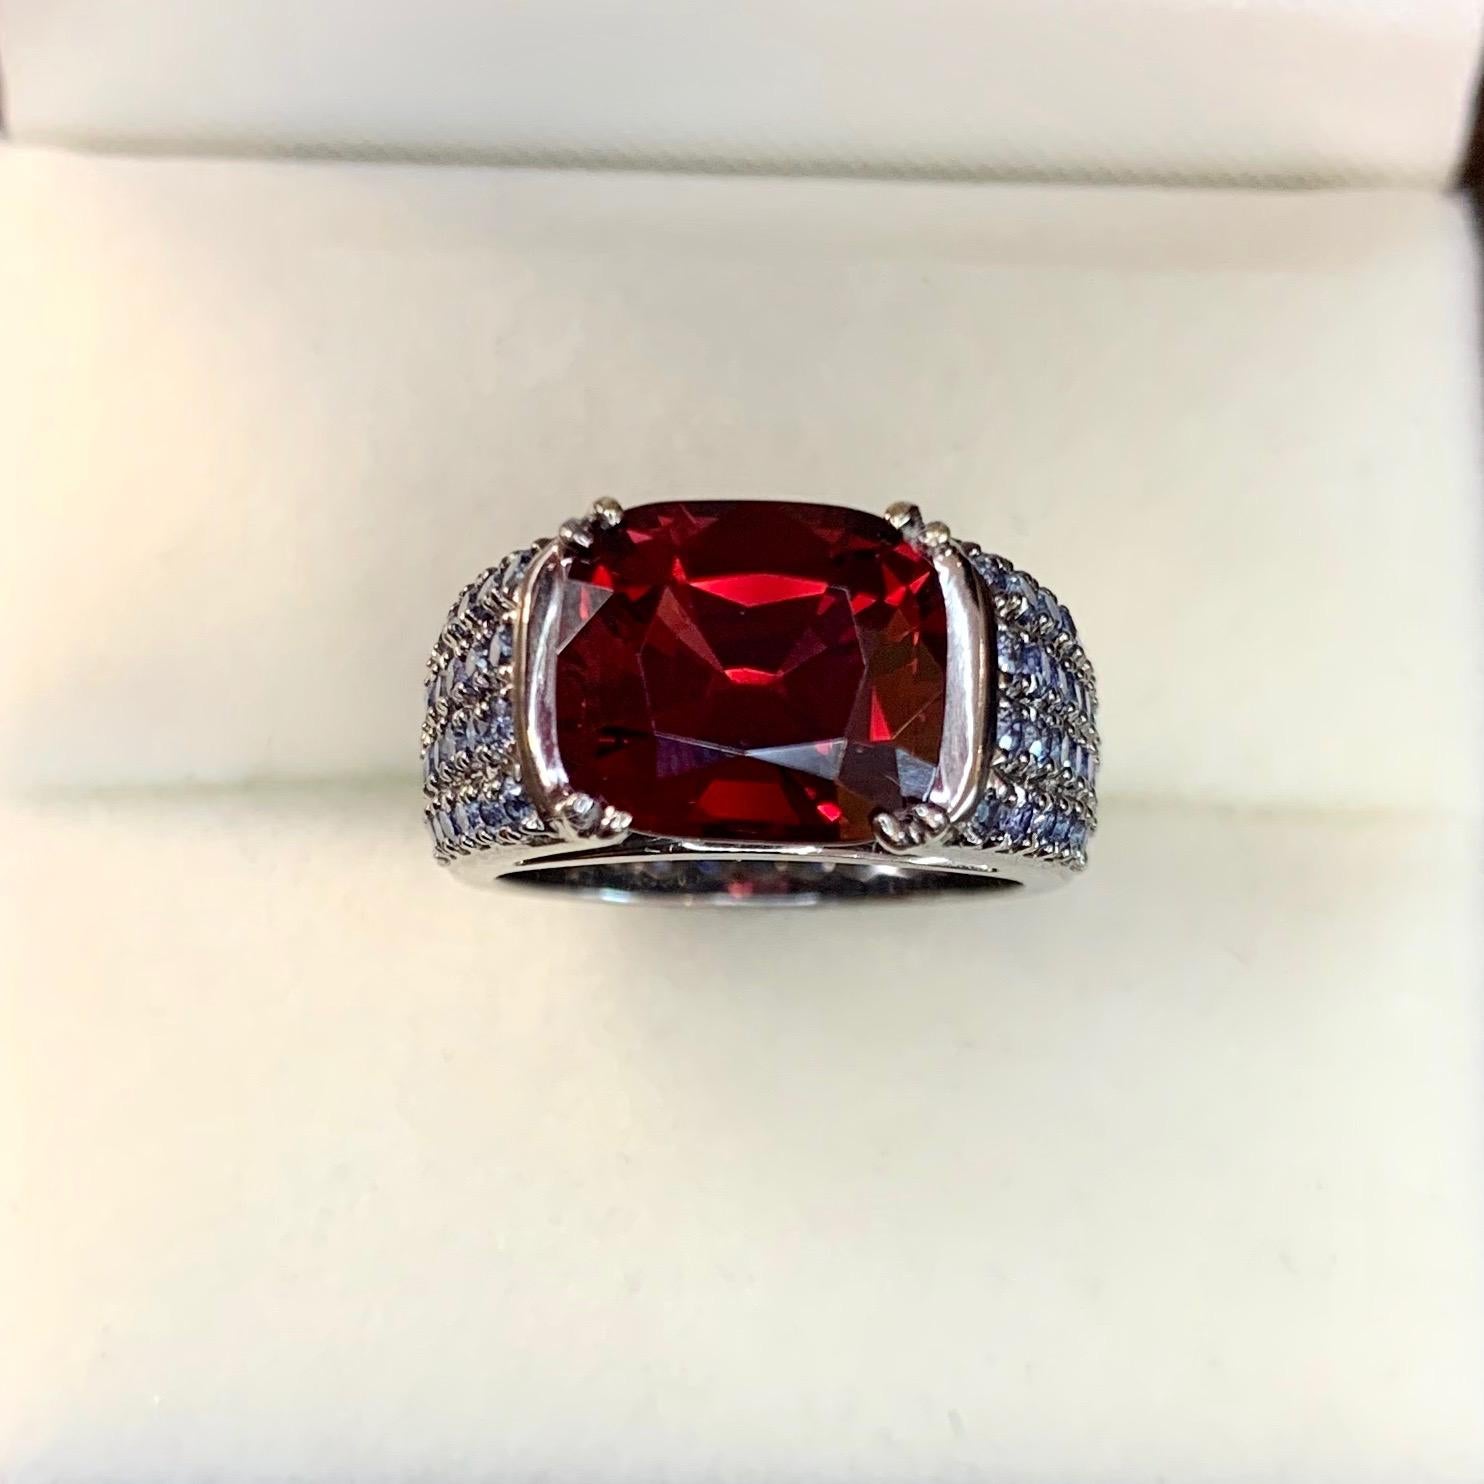 It is always interesting to make jewelry with beautiful red stones.
That is why we chose 18 karat gold with black rhodium to enhance the red color of quite big red Burmese spinel (around 3 carat) and make very stylish and elegant frame with